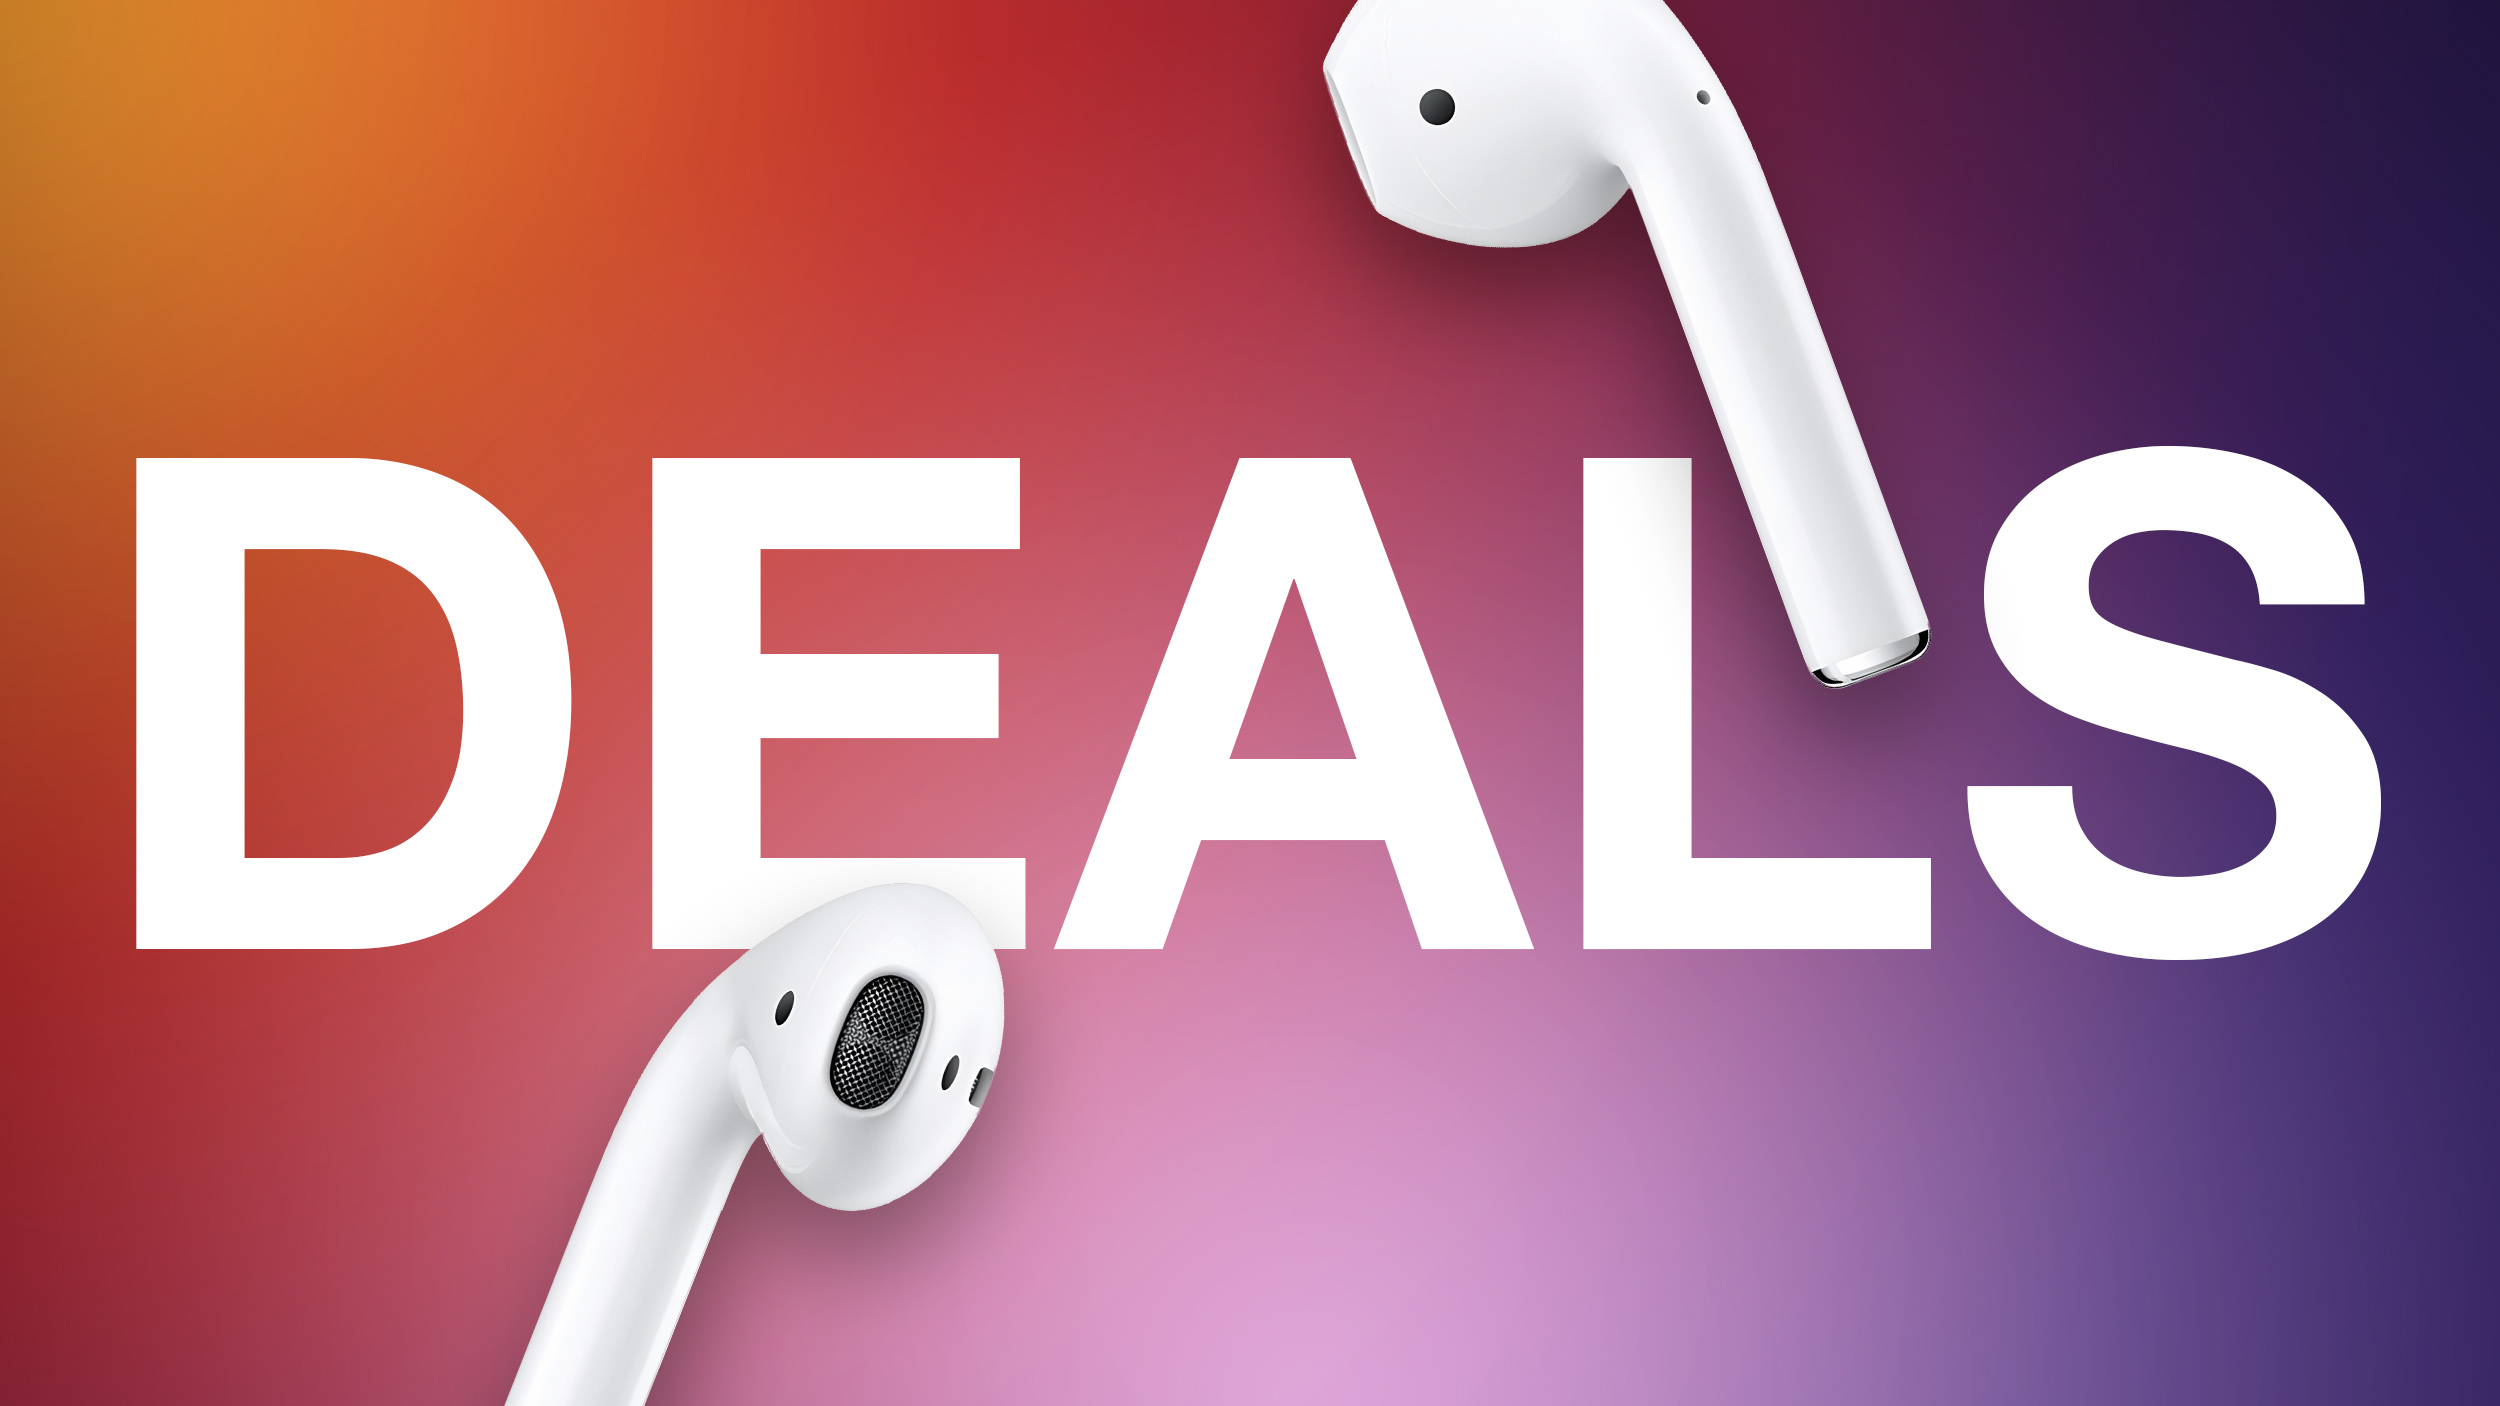 AirPods Weekend Deals Include Up to $59 Off Select Models at Amazon